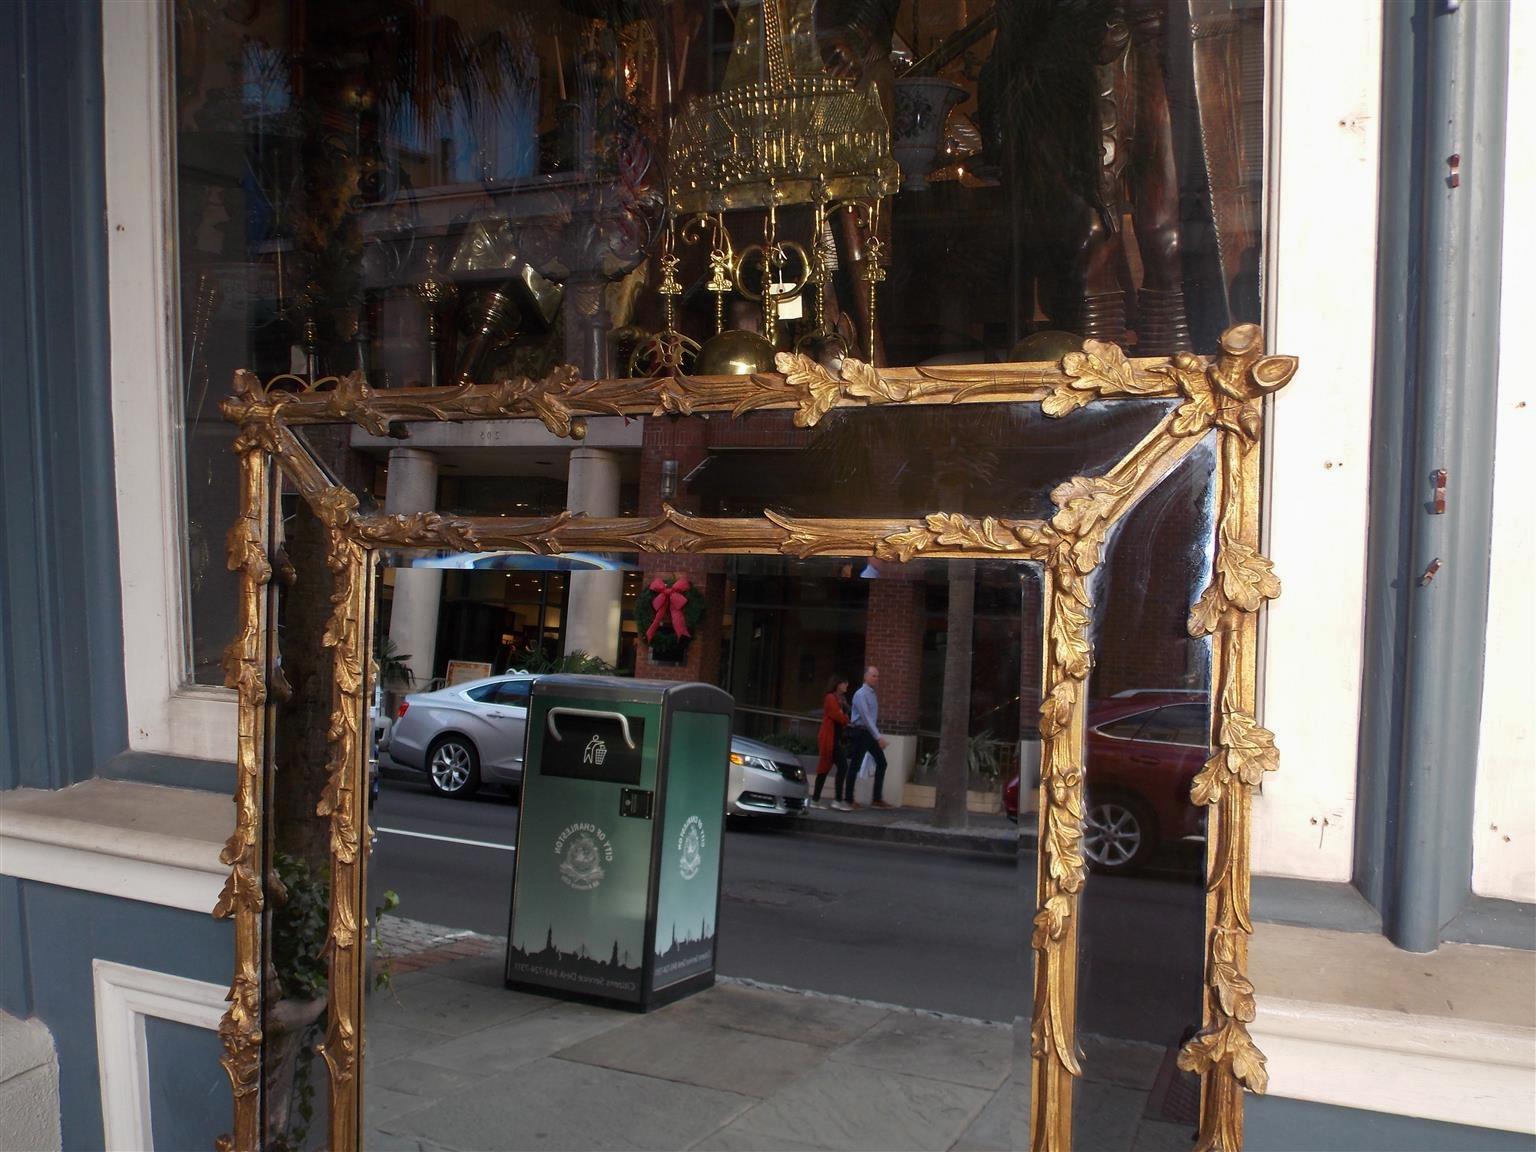 Beveled Pair of French Gilt Carved Wood Foliage and Acorn Motif Wall Mirrors, C. 1840